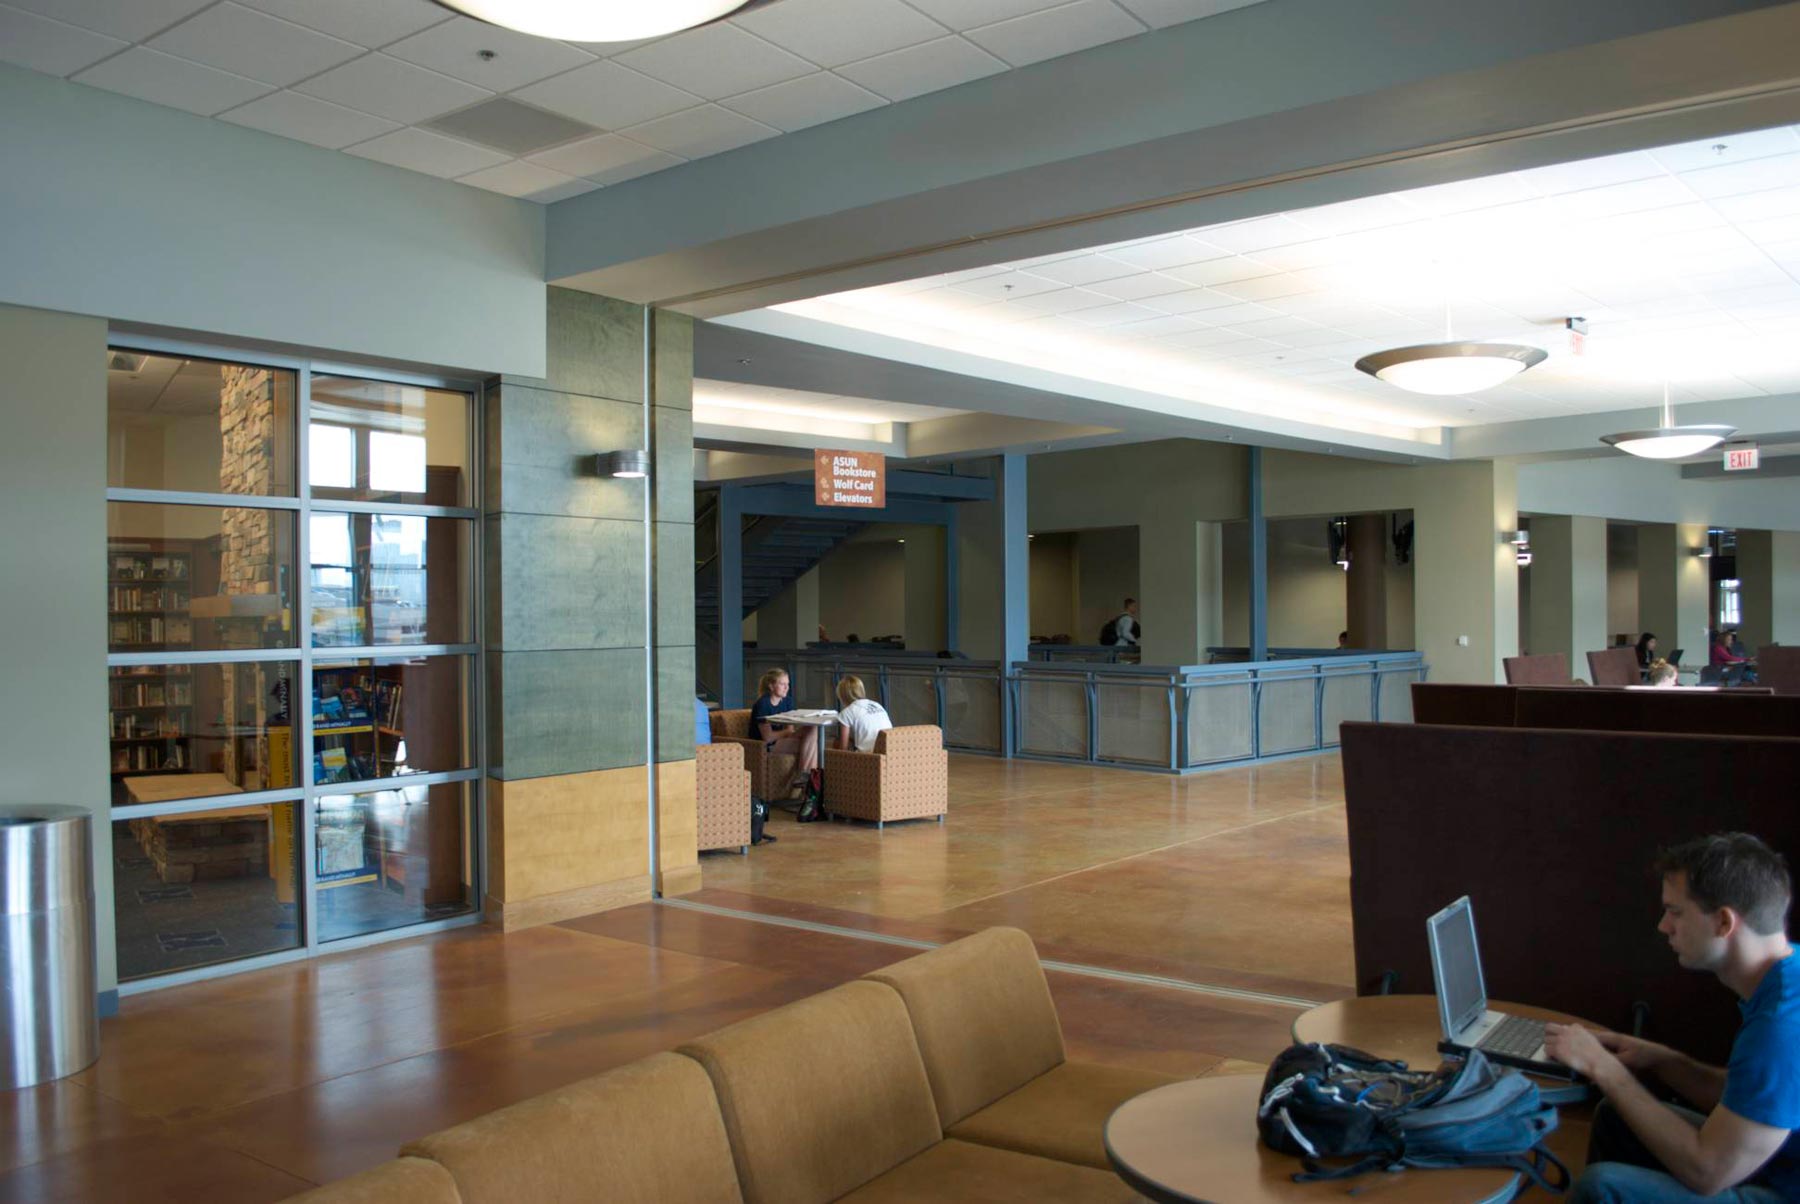 Southwest lounge and corridor at bookstore